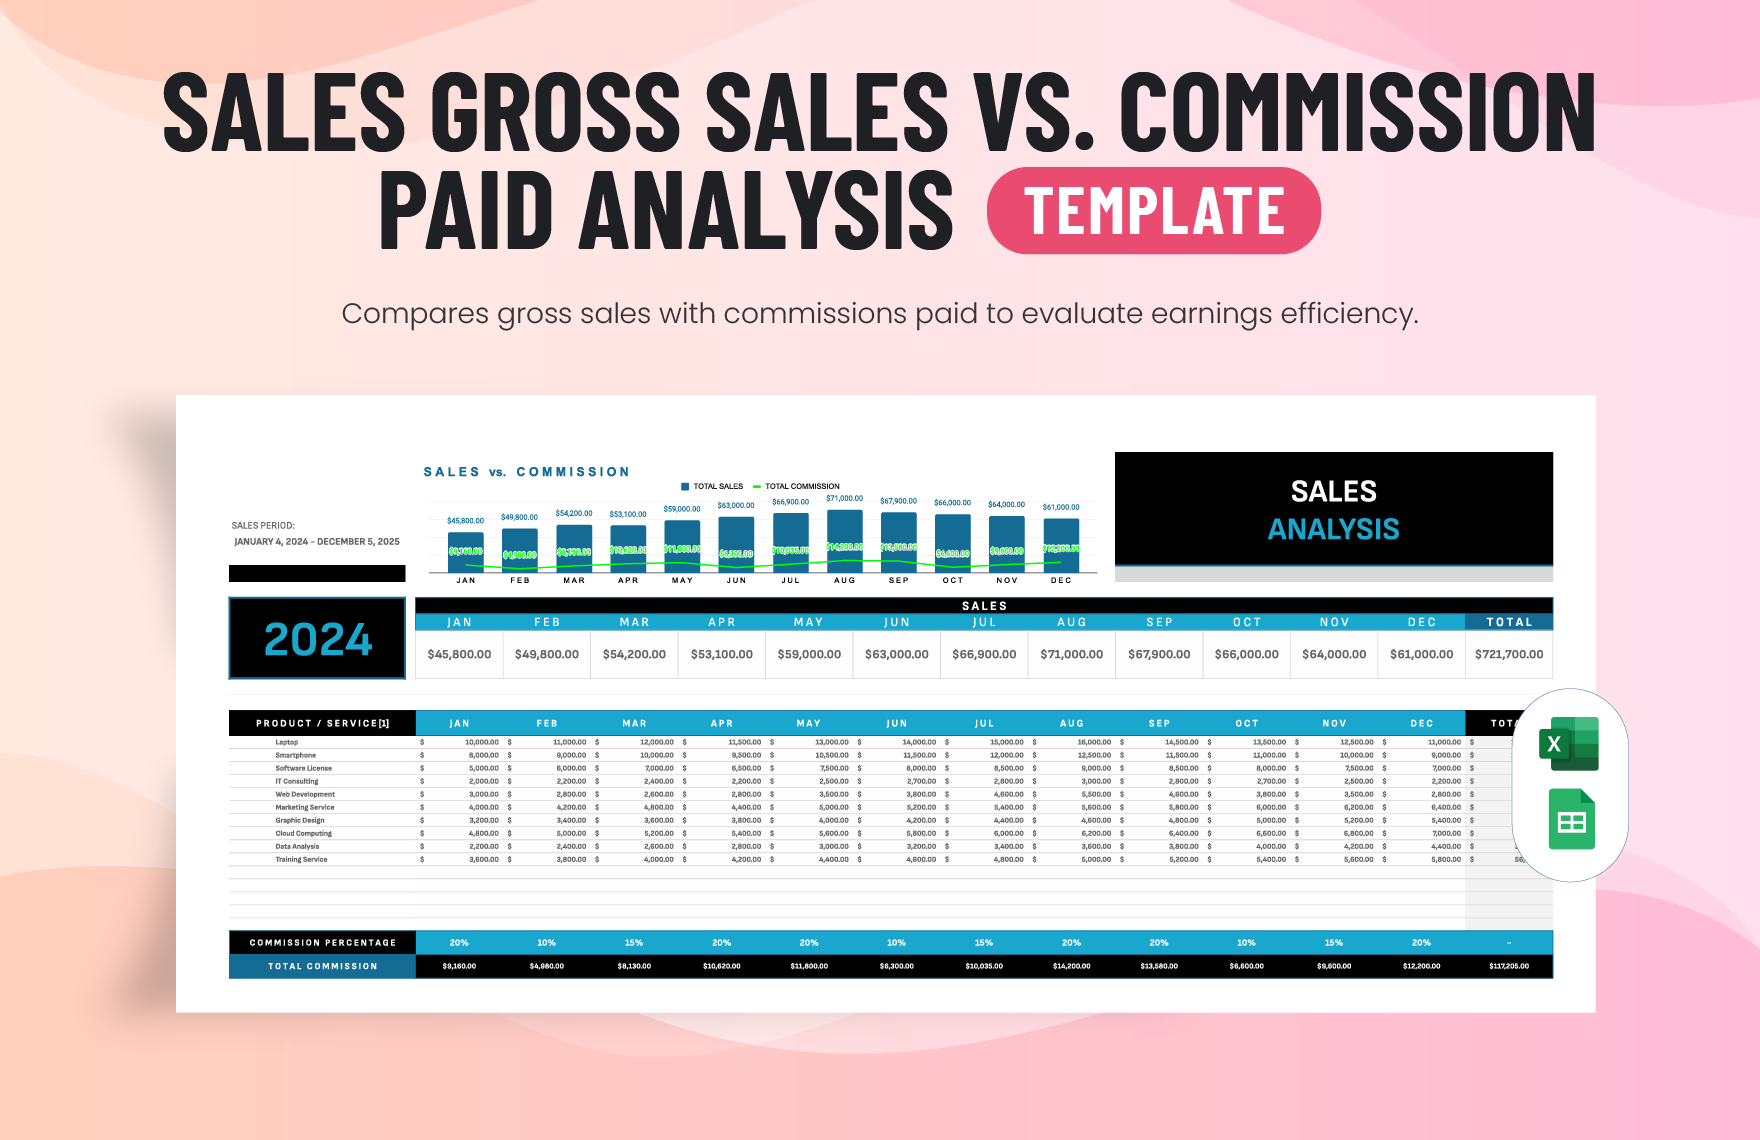 Sales Gross Sales vs. Commission Paid Analysis Template